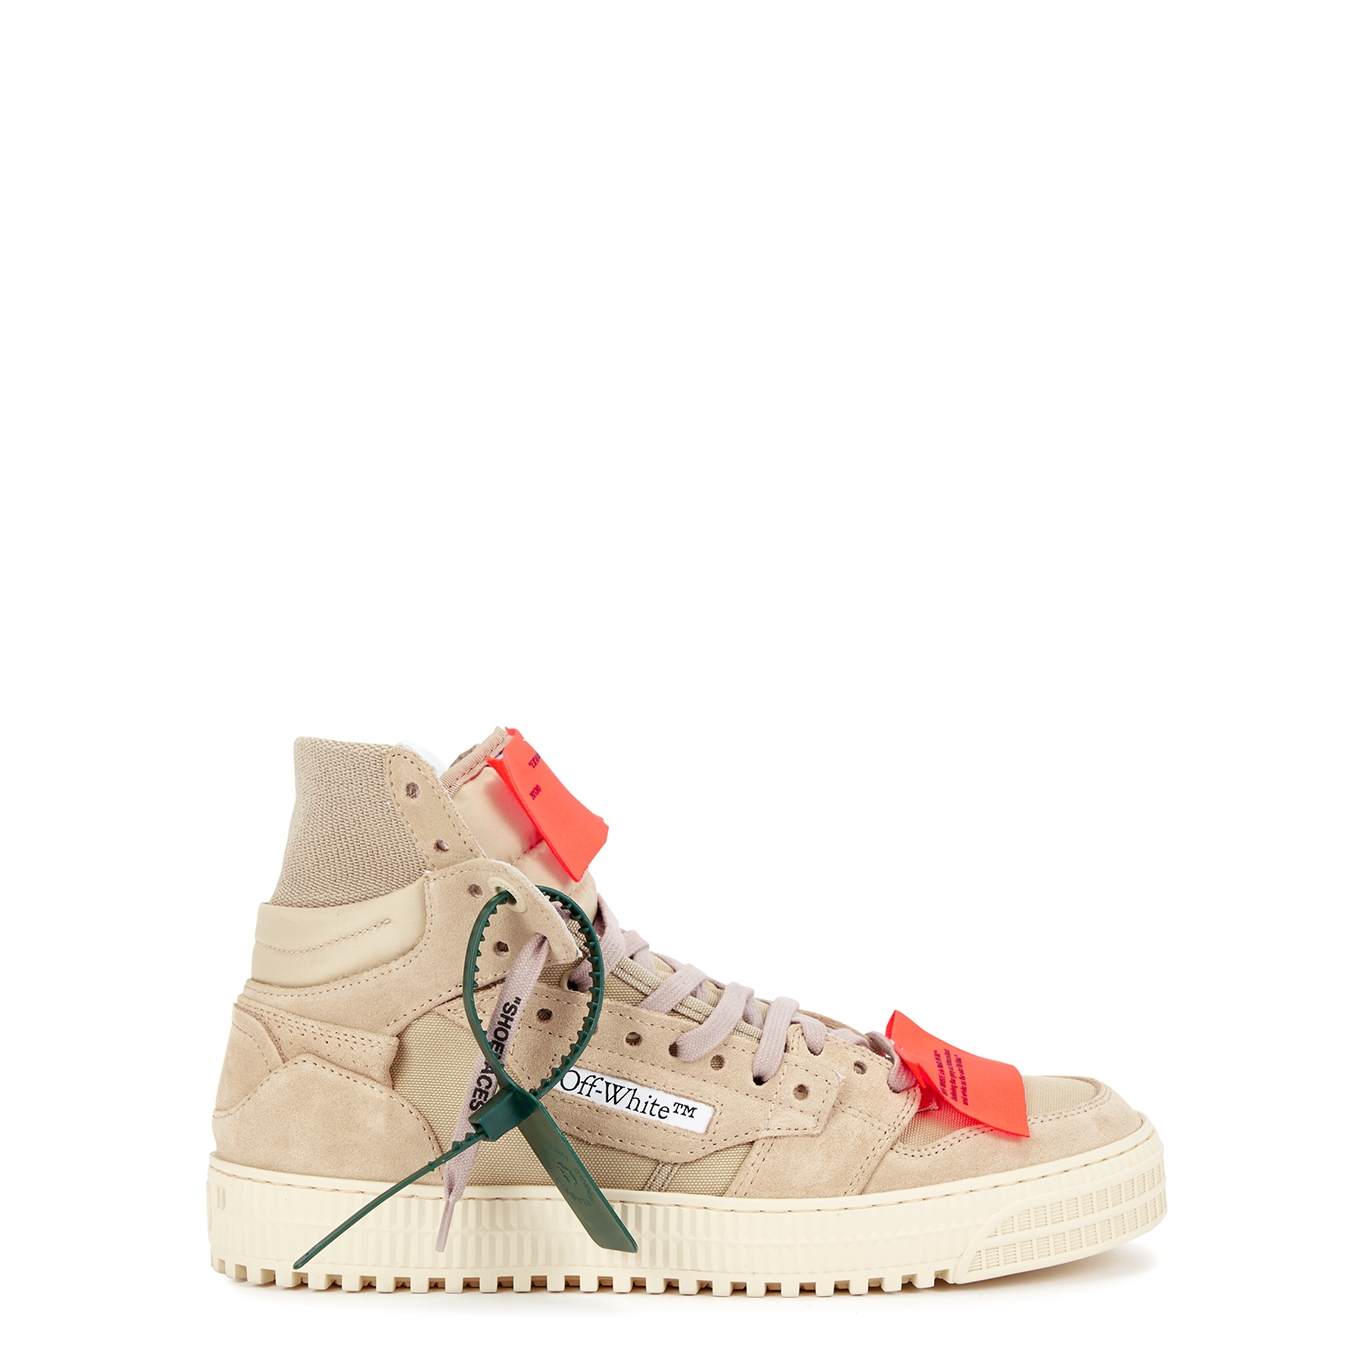 OFF-WHITE 3.0 COURT PANELLED HI-TOP SNEAKERS